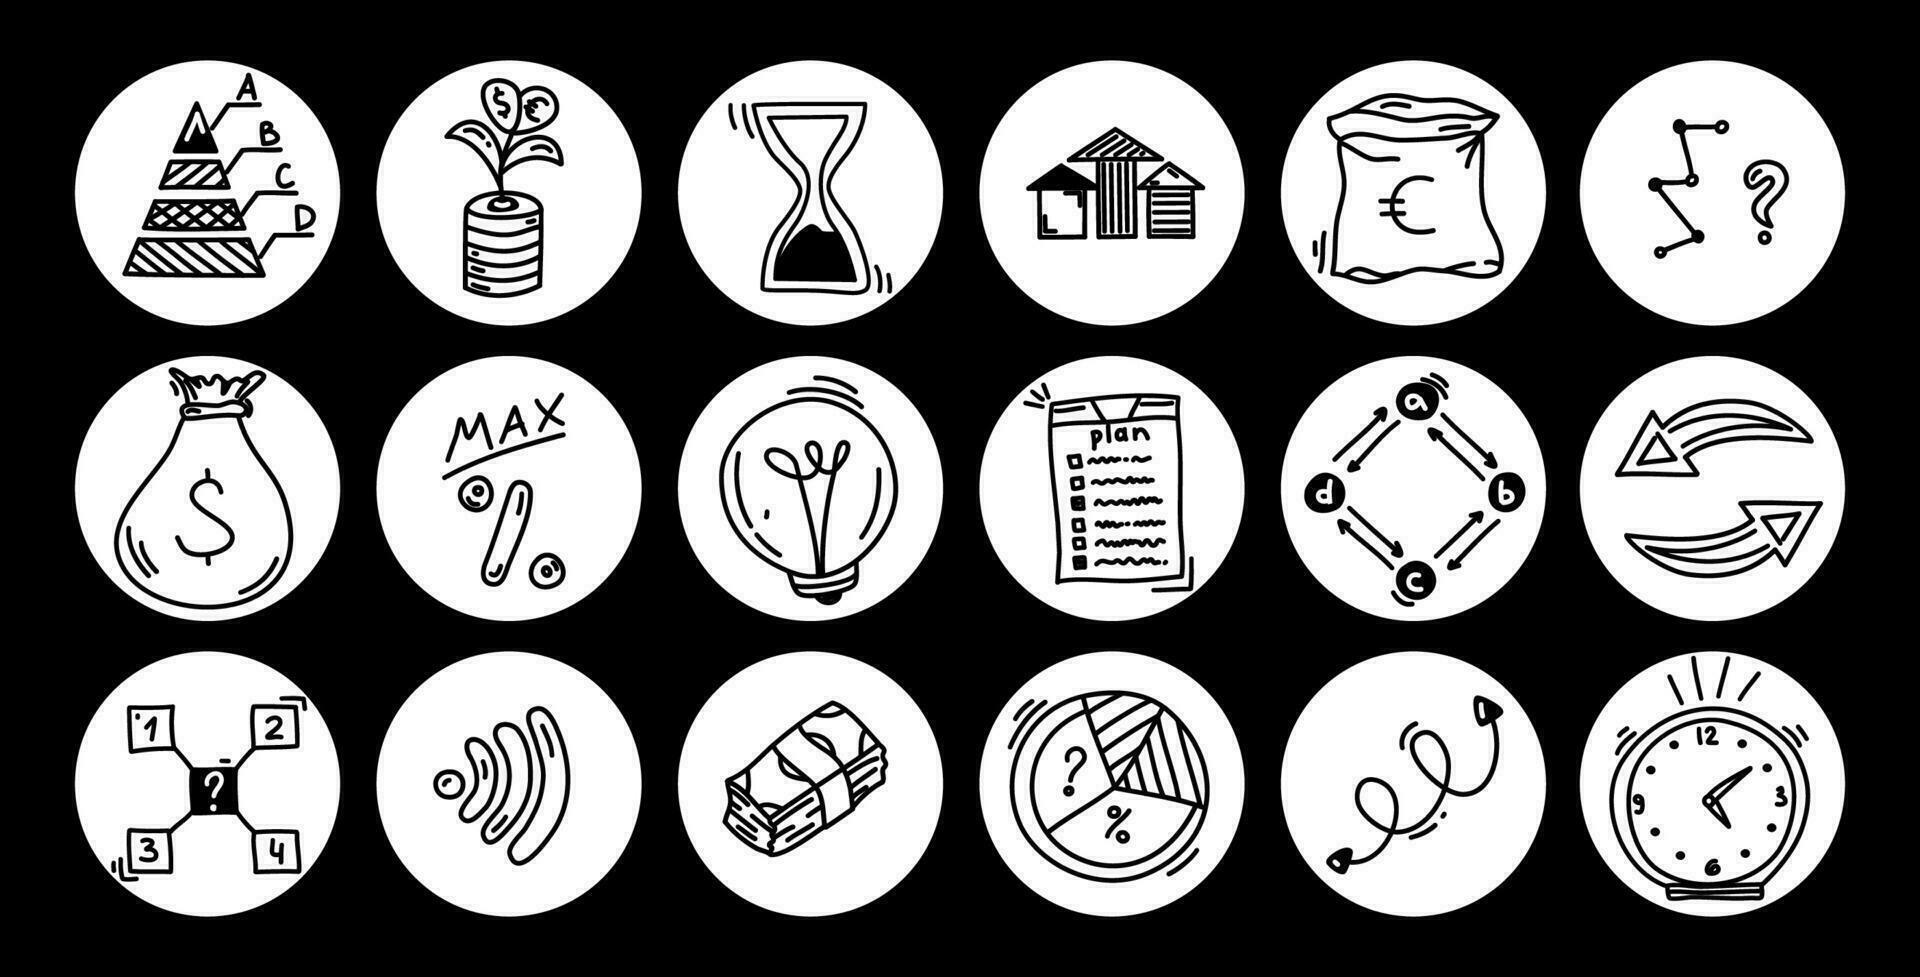 Doodle business icons in circles, sketch elements, financial hand drawn illustration. Pyramid, money, schemes, coins, lamp, time, arrows. Vector growth success concept on black background